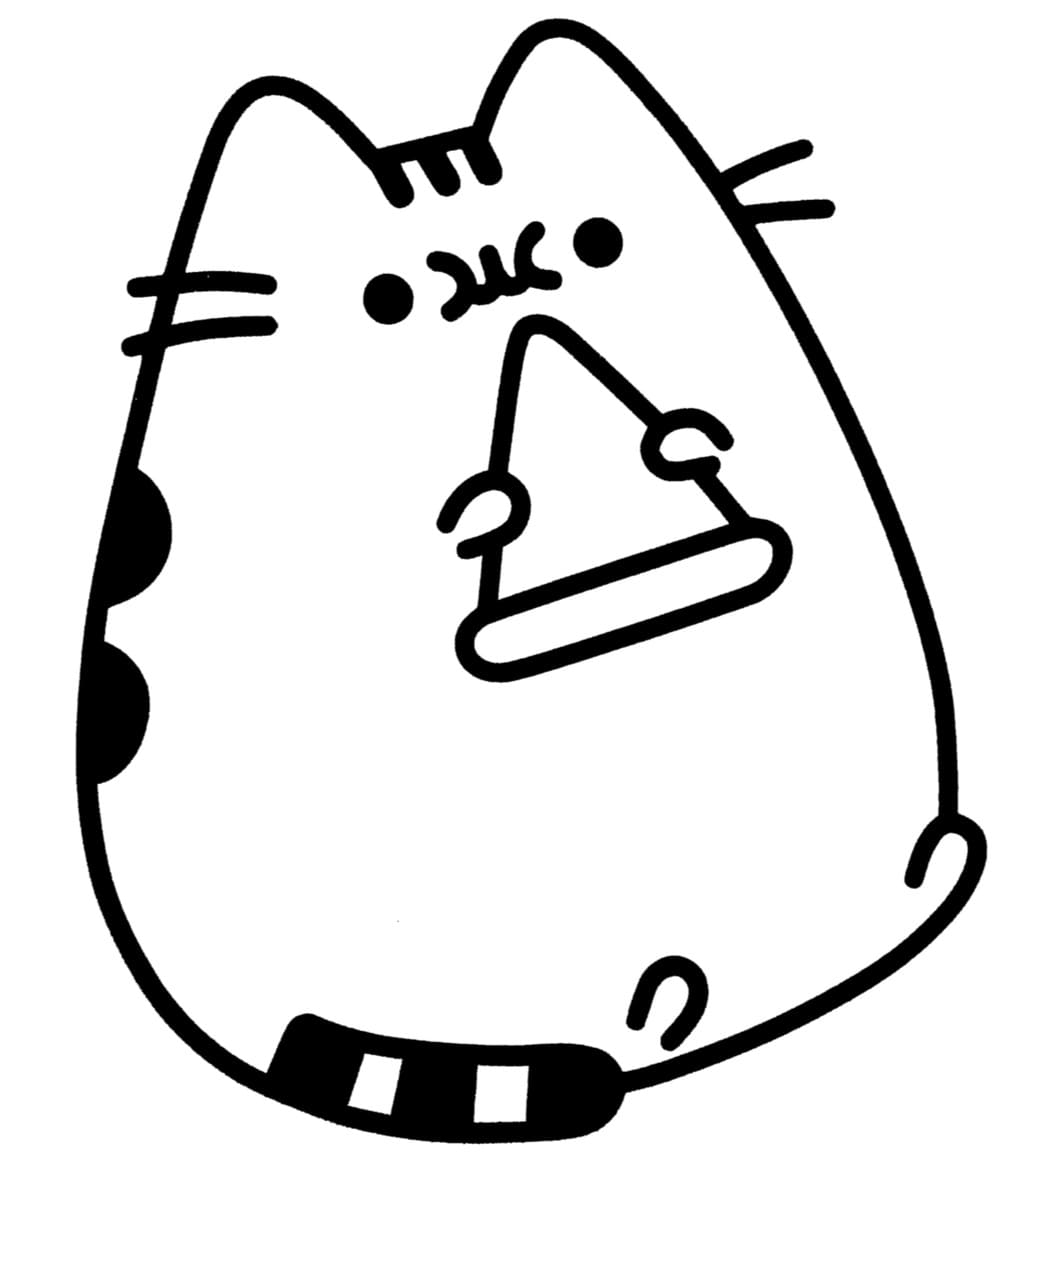 Cat Pusheen 2021 Coloring Pages Coloring Pages Coloring Pages For